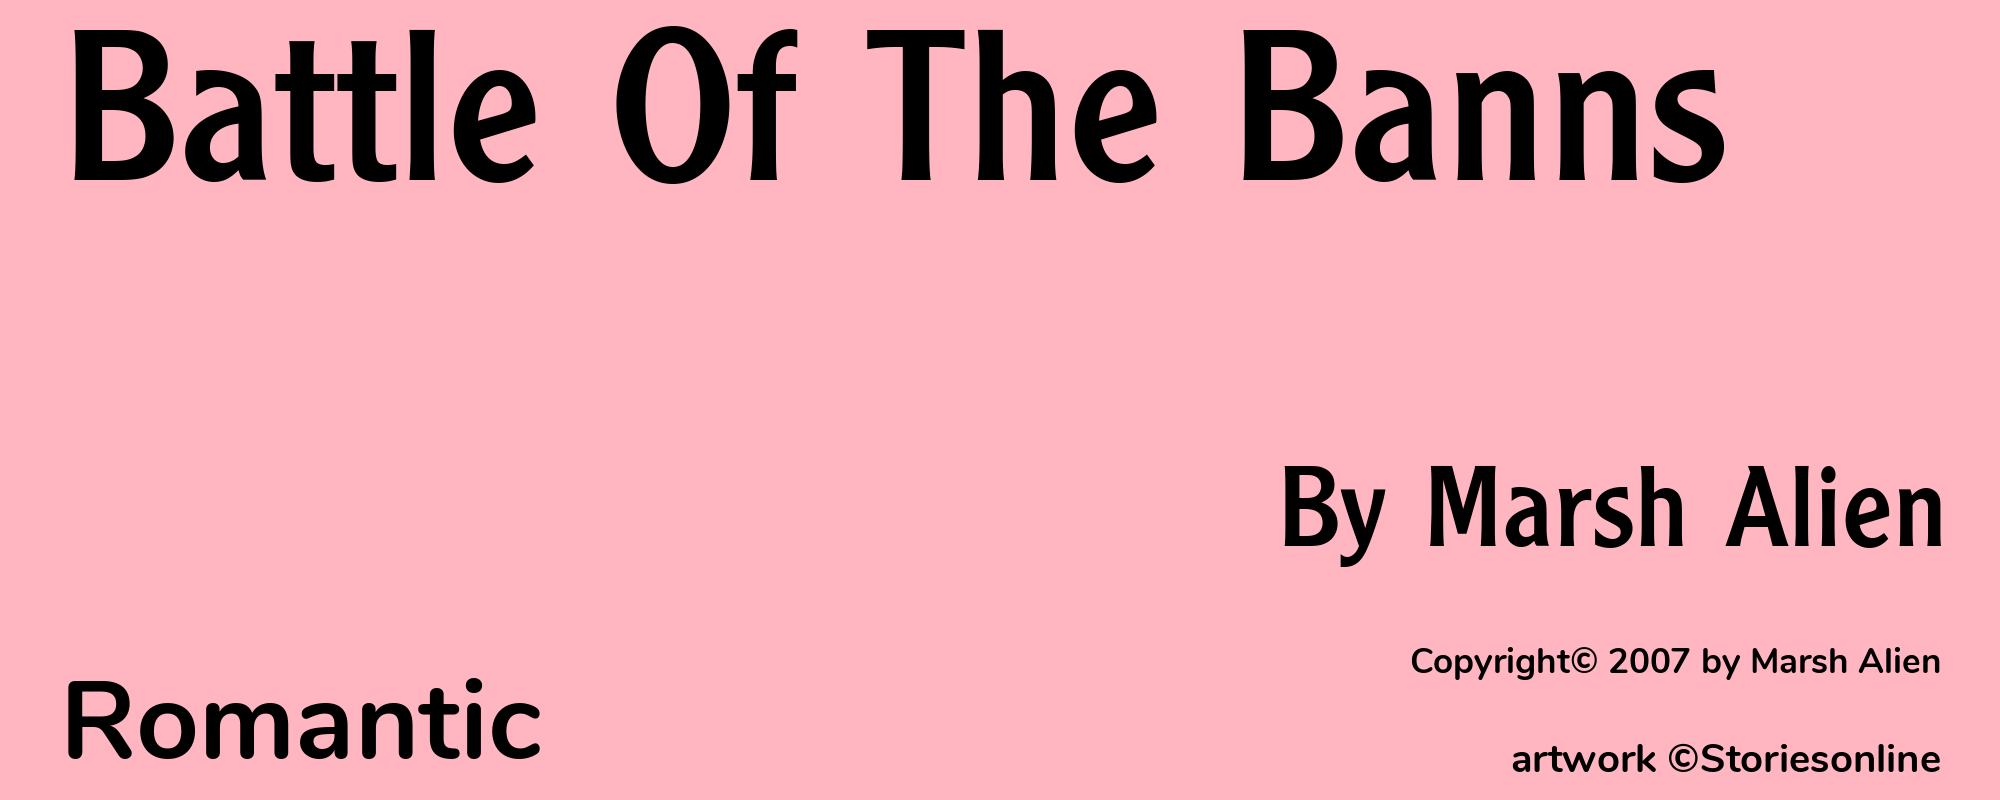 Battle Of The Banns - Cover